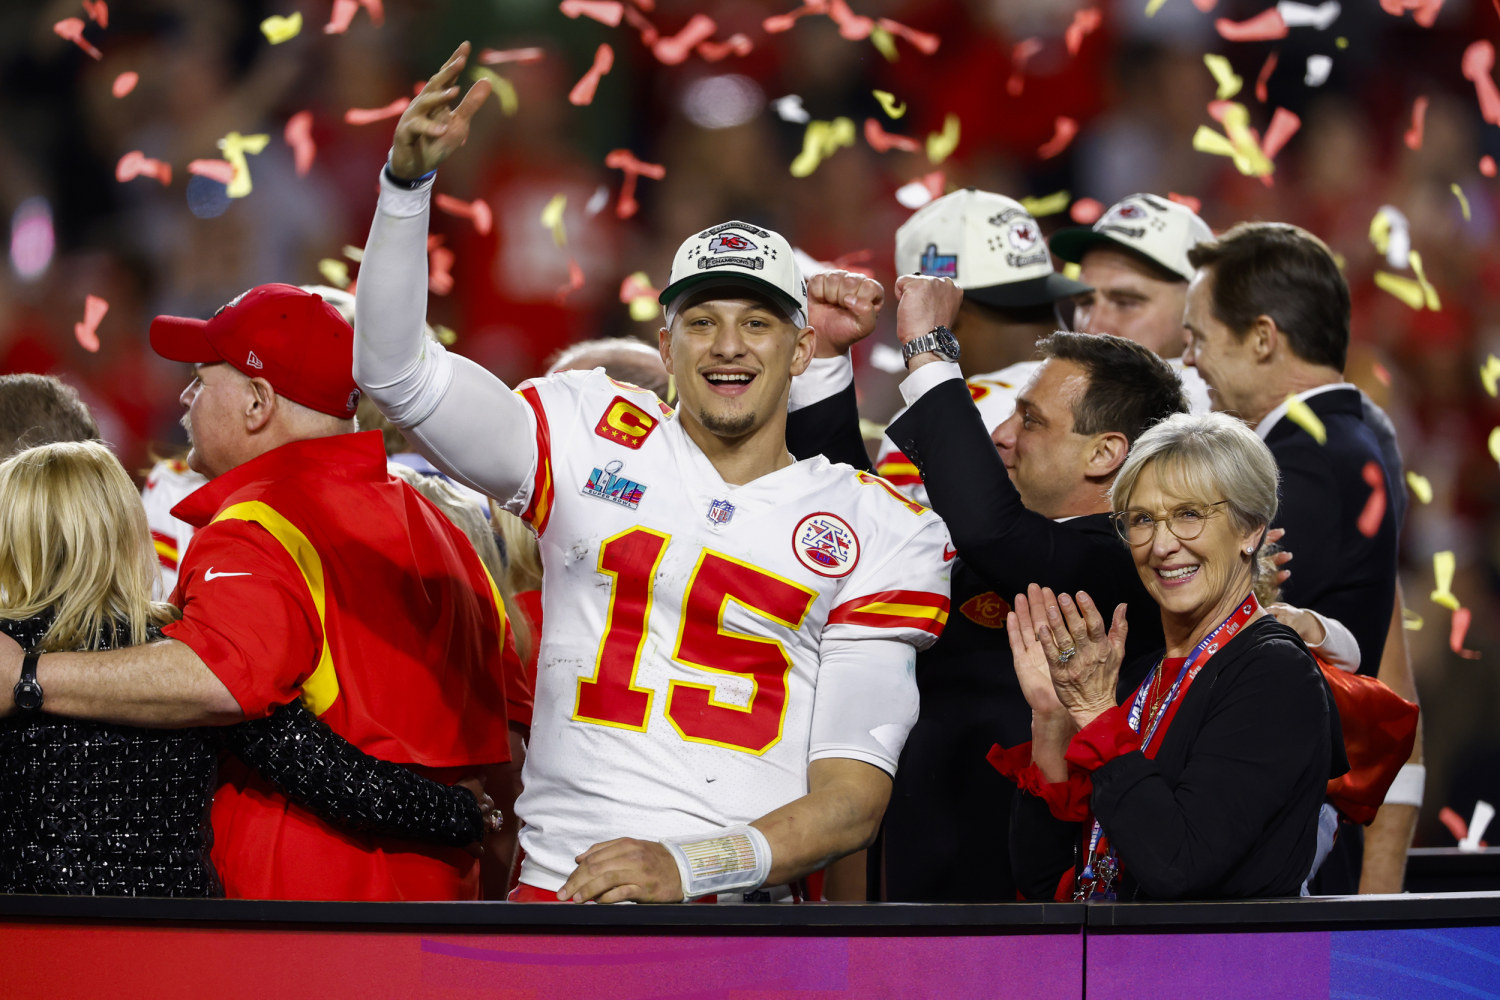 Chiefs Super Bowl champions gear: How to get Kansas City Chiefs gear online  after Super Bowl LVII win over Eagles